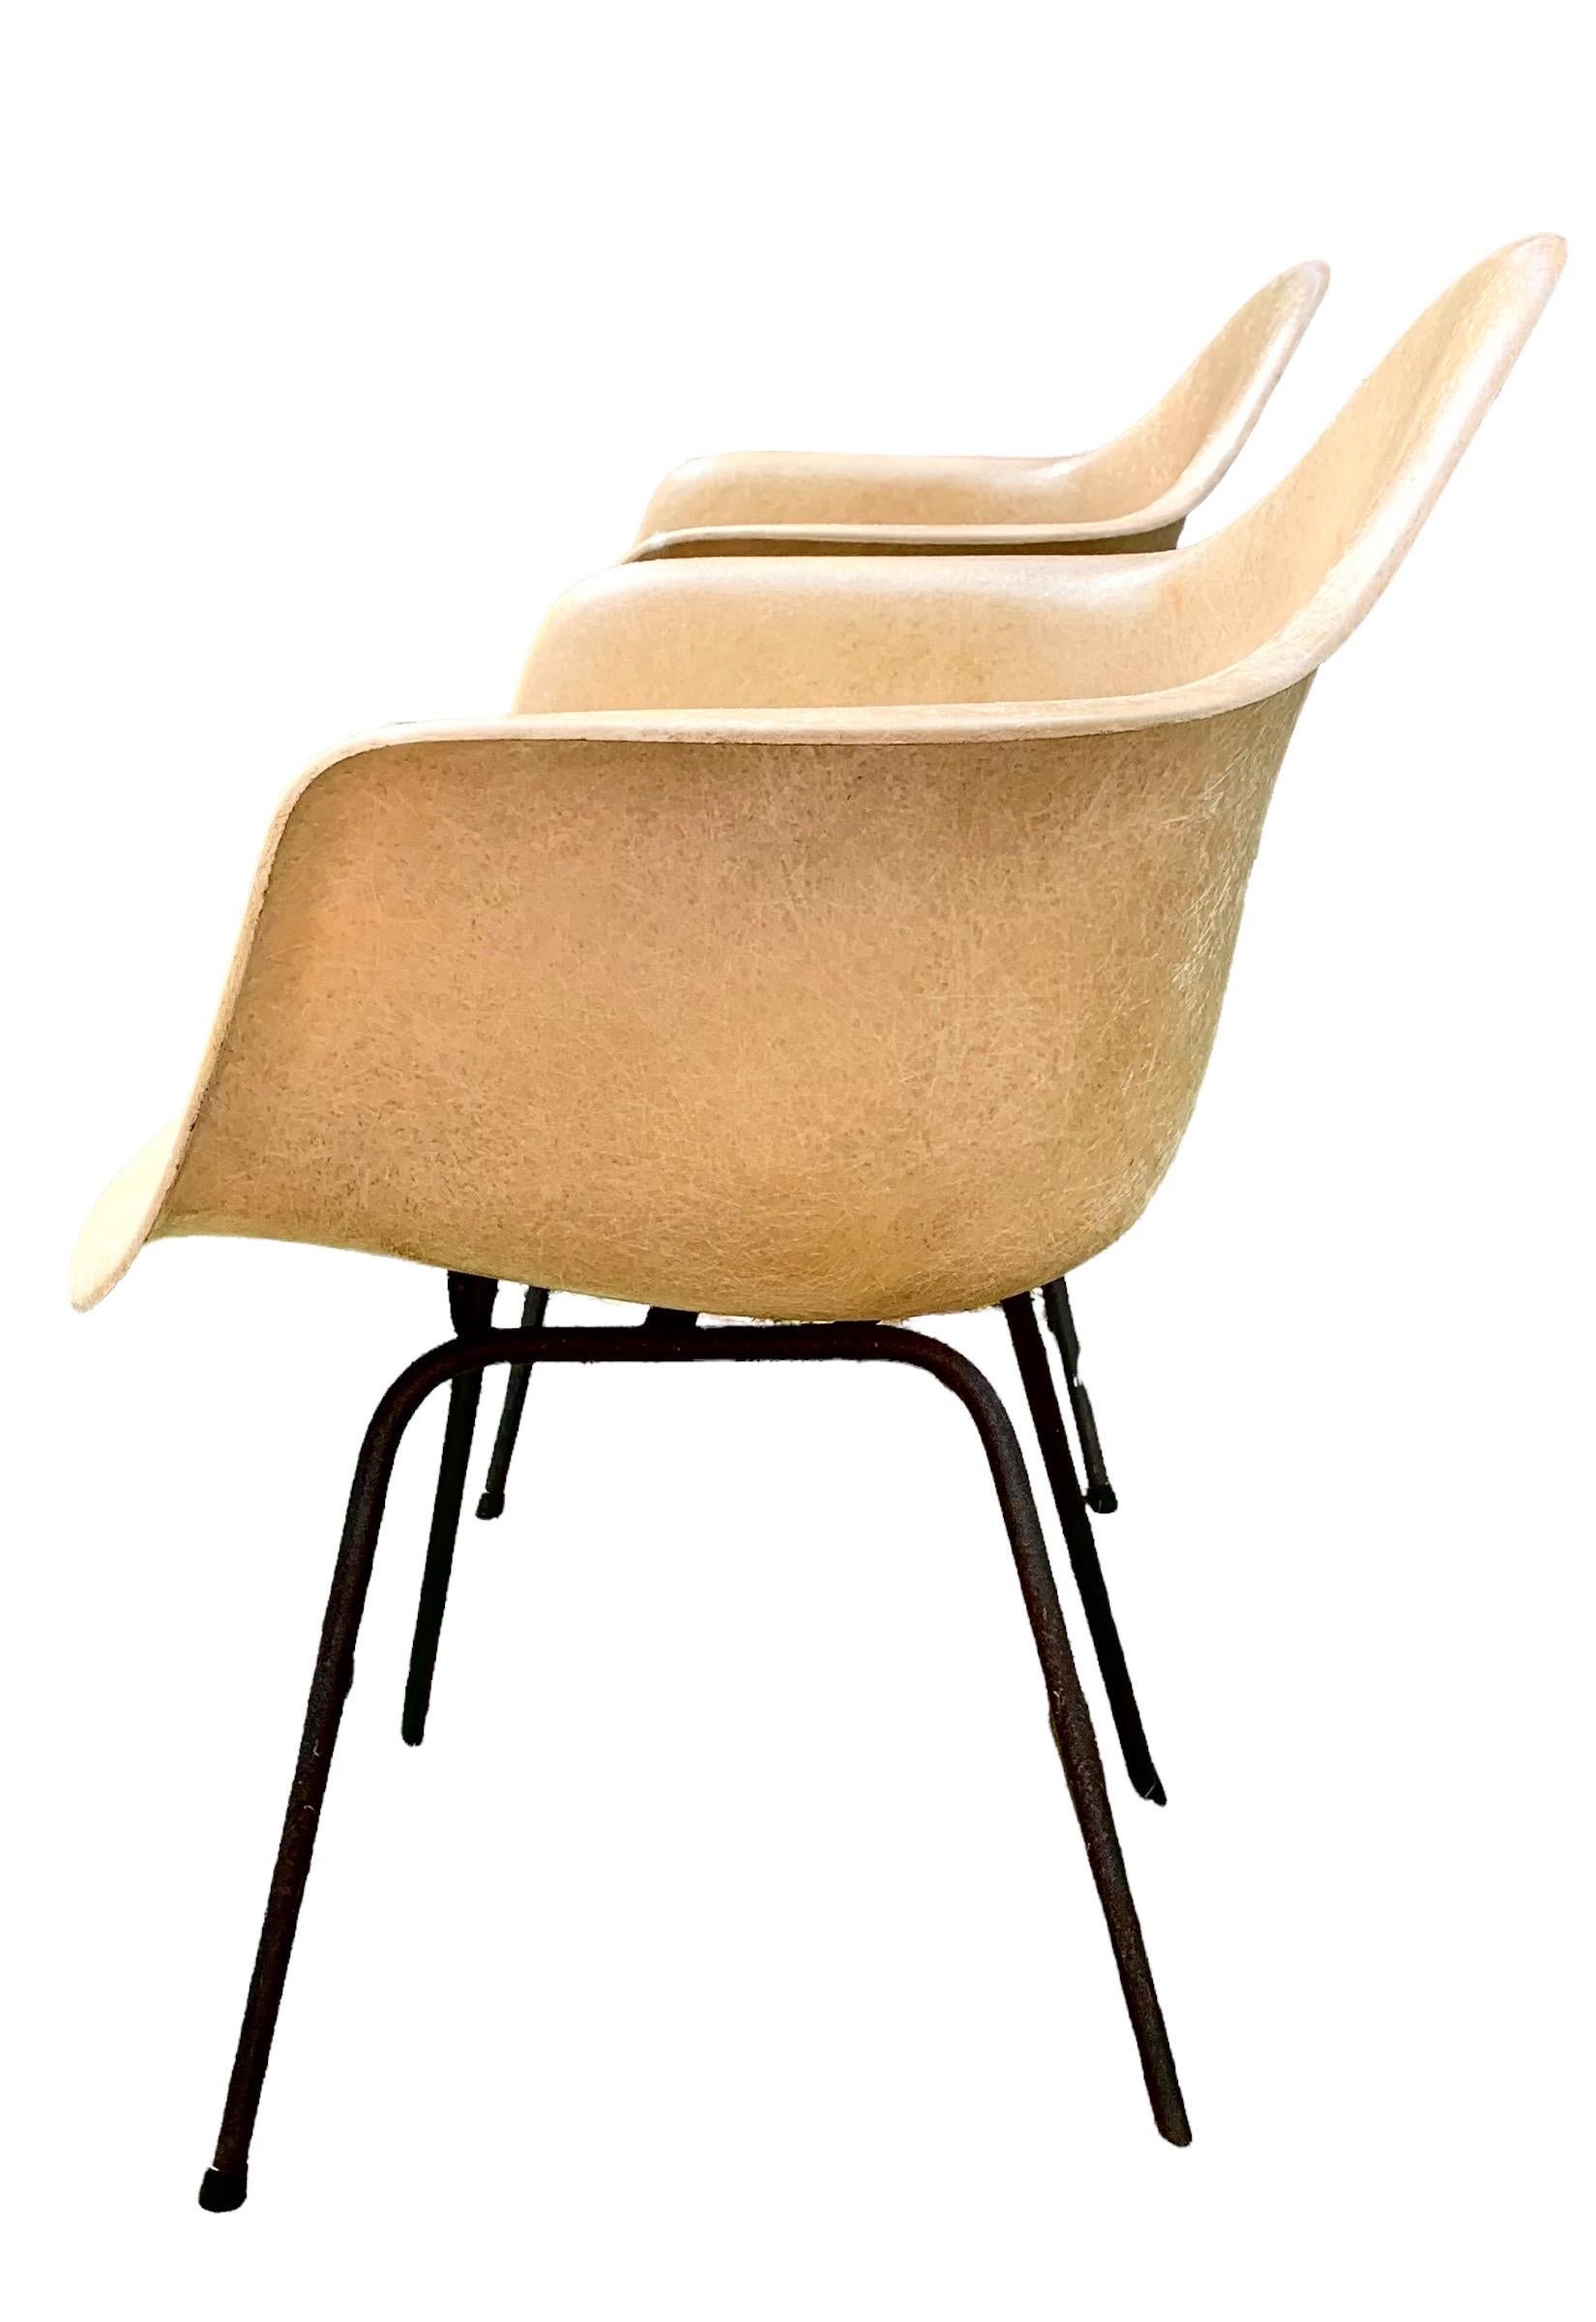 A pair of Charles Eames molded fiberglass shell arm chairs for Herman Miller, in a parchment color with original paper labels present, produced between 1951 and 1955. 
Borne out of Charles' and Eero Saarinen's early investigations molding plywood